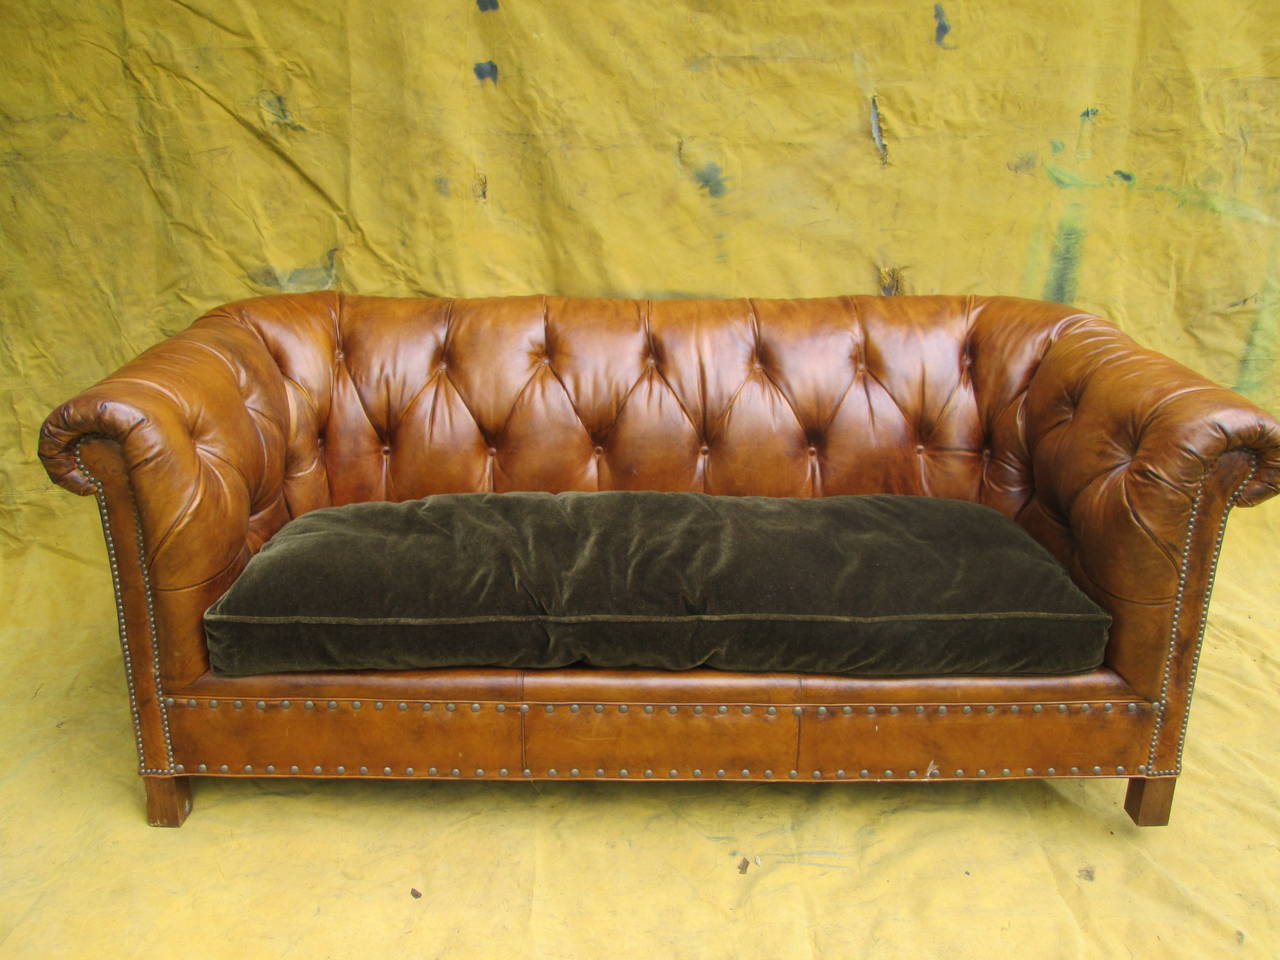 Grand scale tufted cowhide sofa with loose mohair cushion. High rolling arms. Minimal wear to leather. William Alan, High Point, NC.